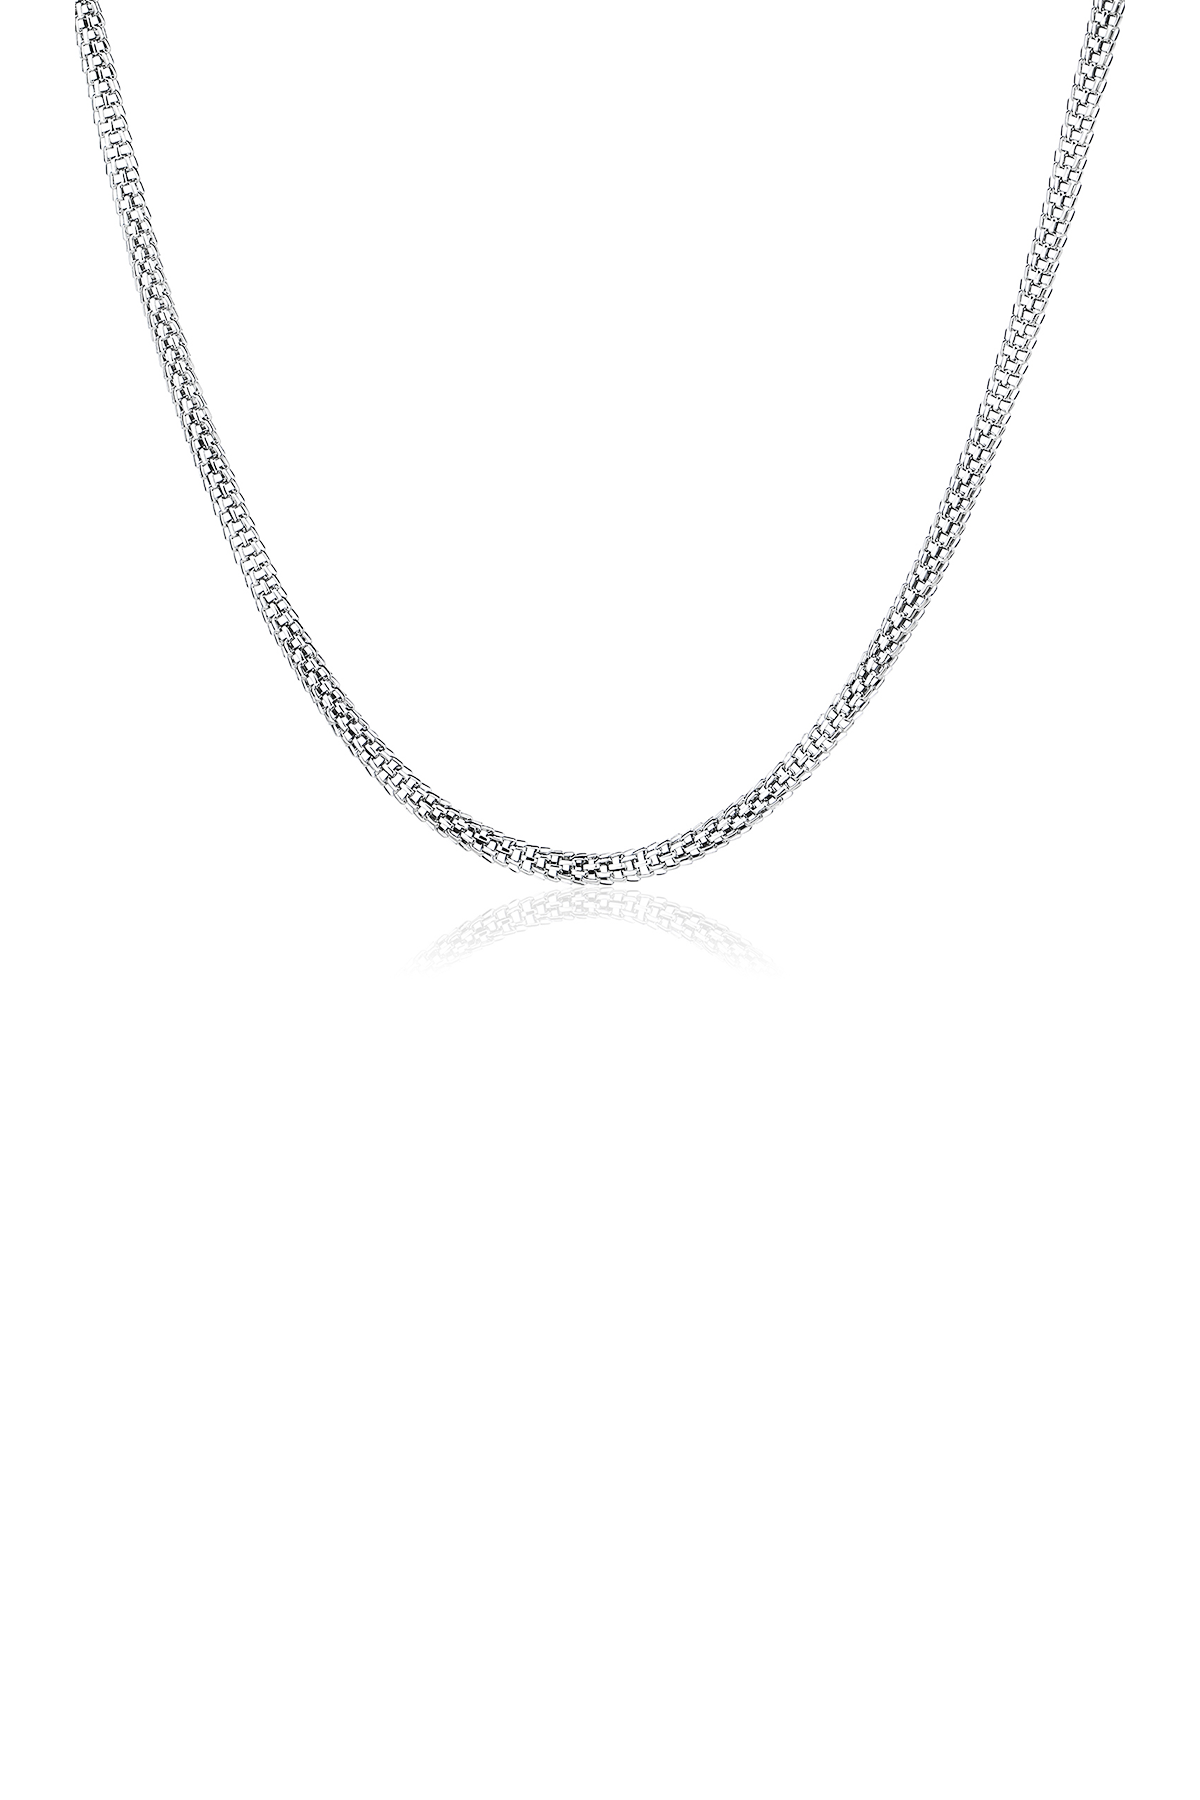 Theresa flat cable necklace, silver - 5 mm